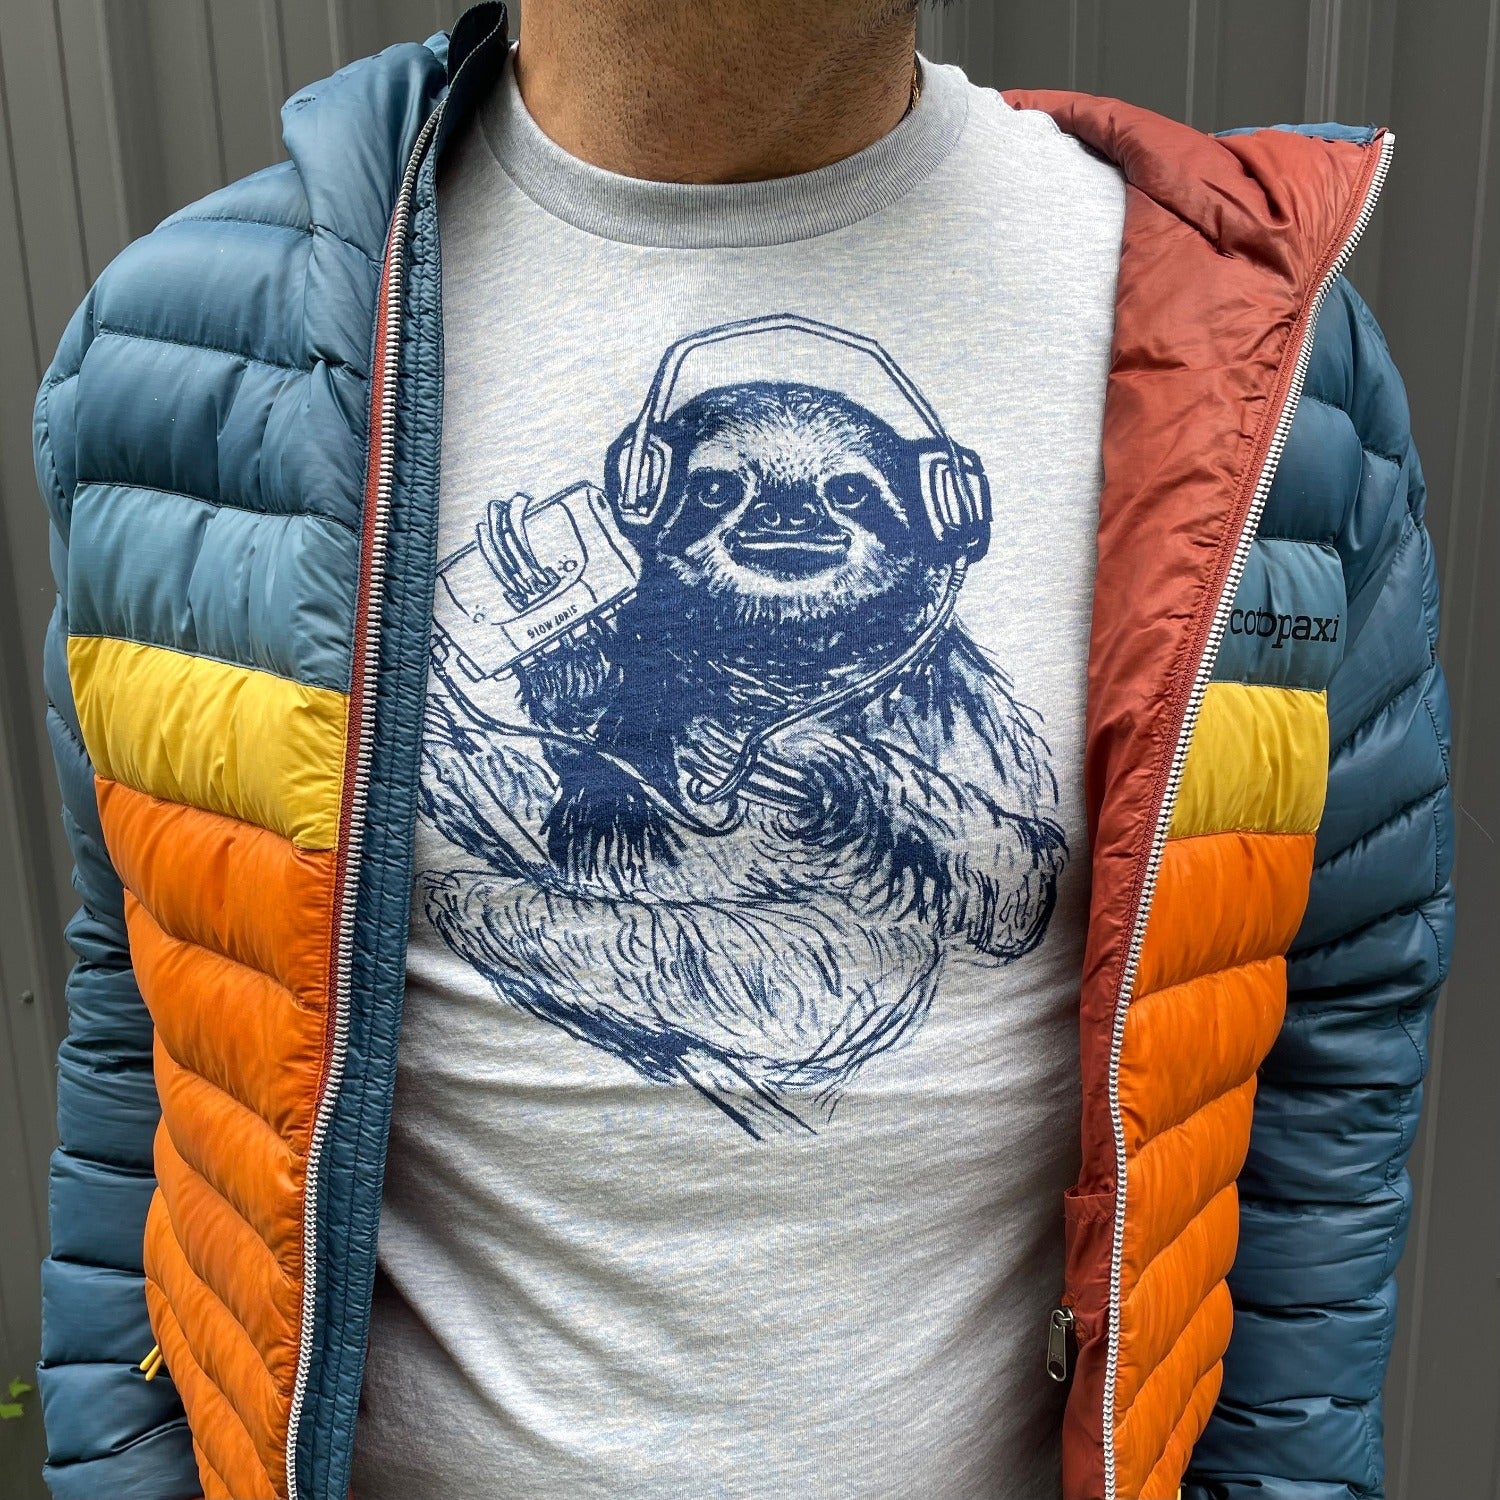 light blue shirt with dark blue screen print of a sloth listening to music on headphones.